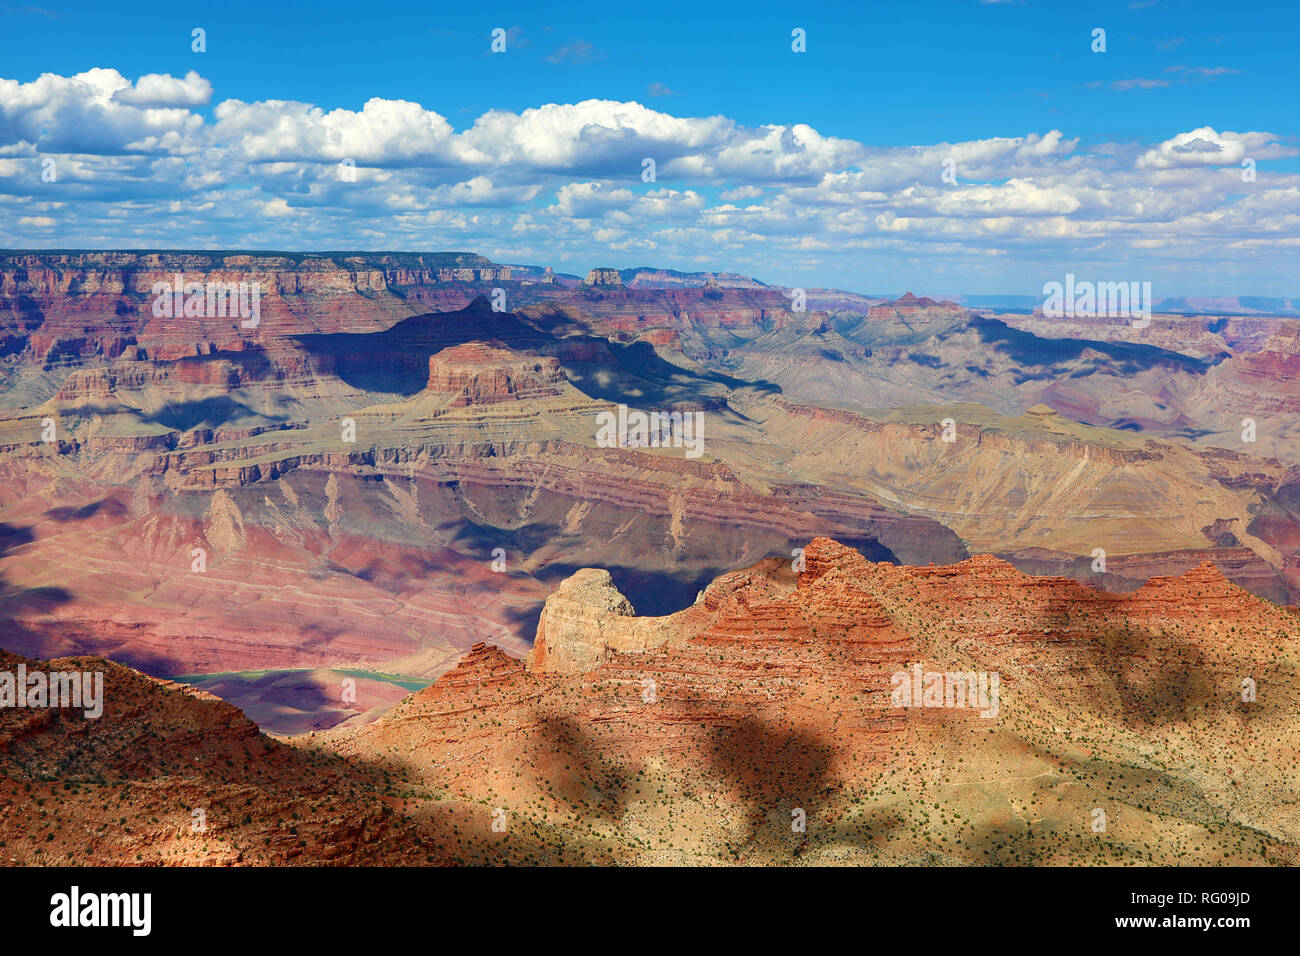 The Grand Canyon seen from the South Rim at Desert View in the Grand Canyon National Park, Arizona, United States of America Stock Photo